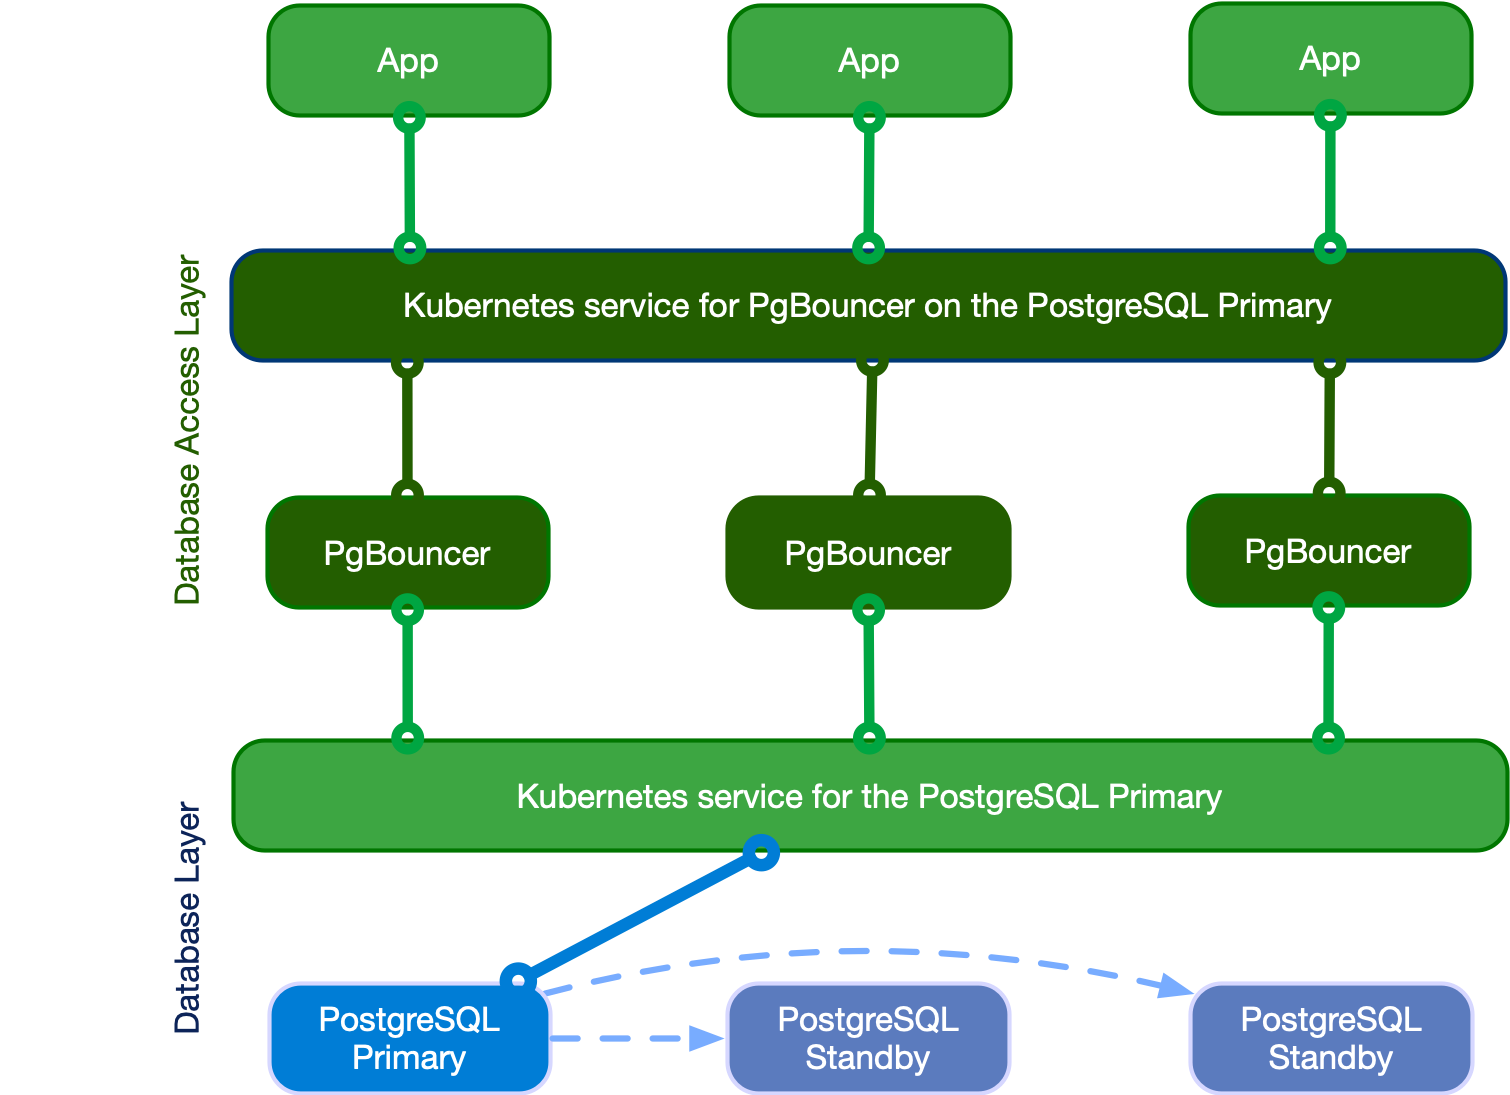 Applications writing to the single primary via PgBouncer